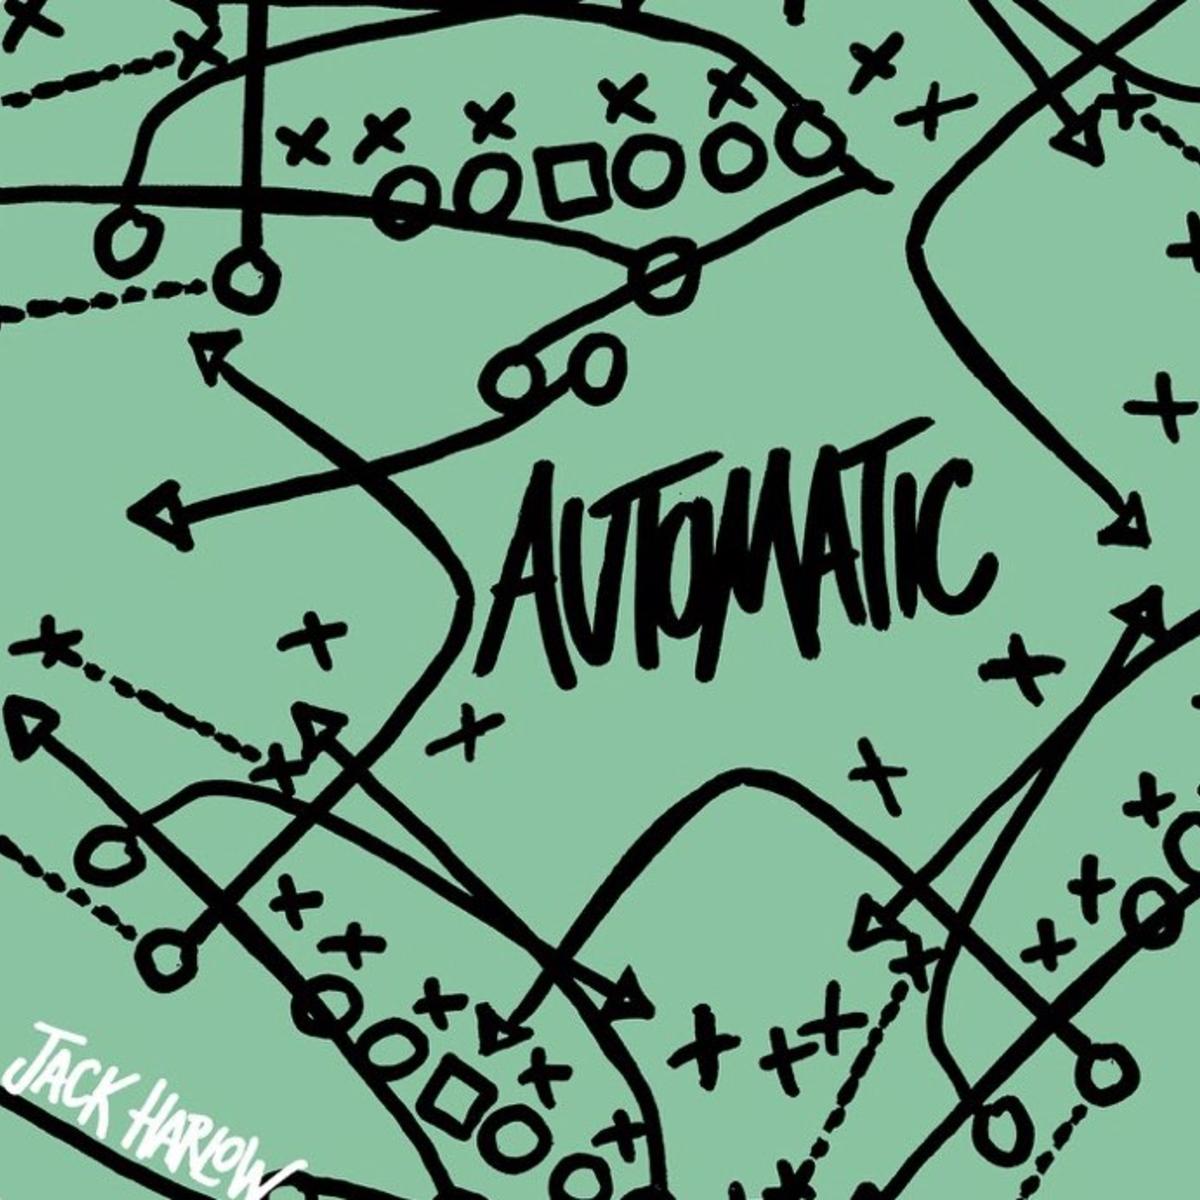 Jack Harlow Returns With “Automatic”